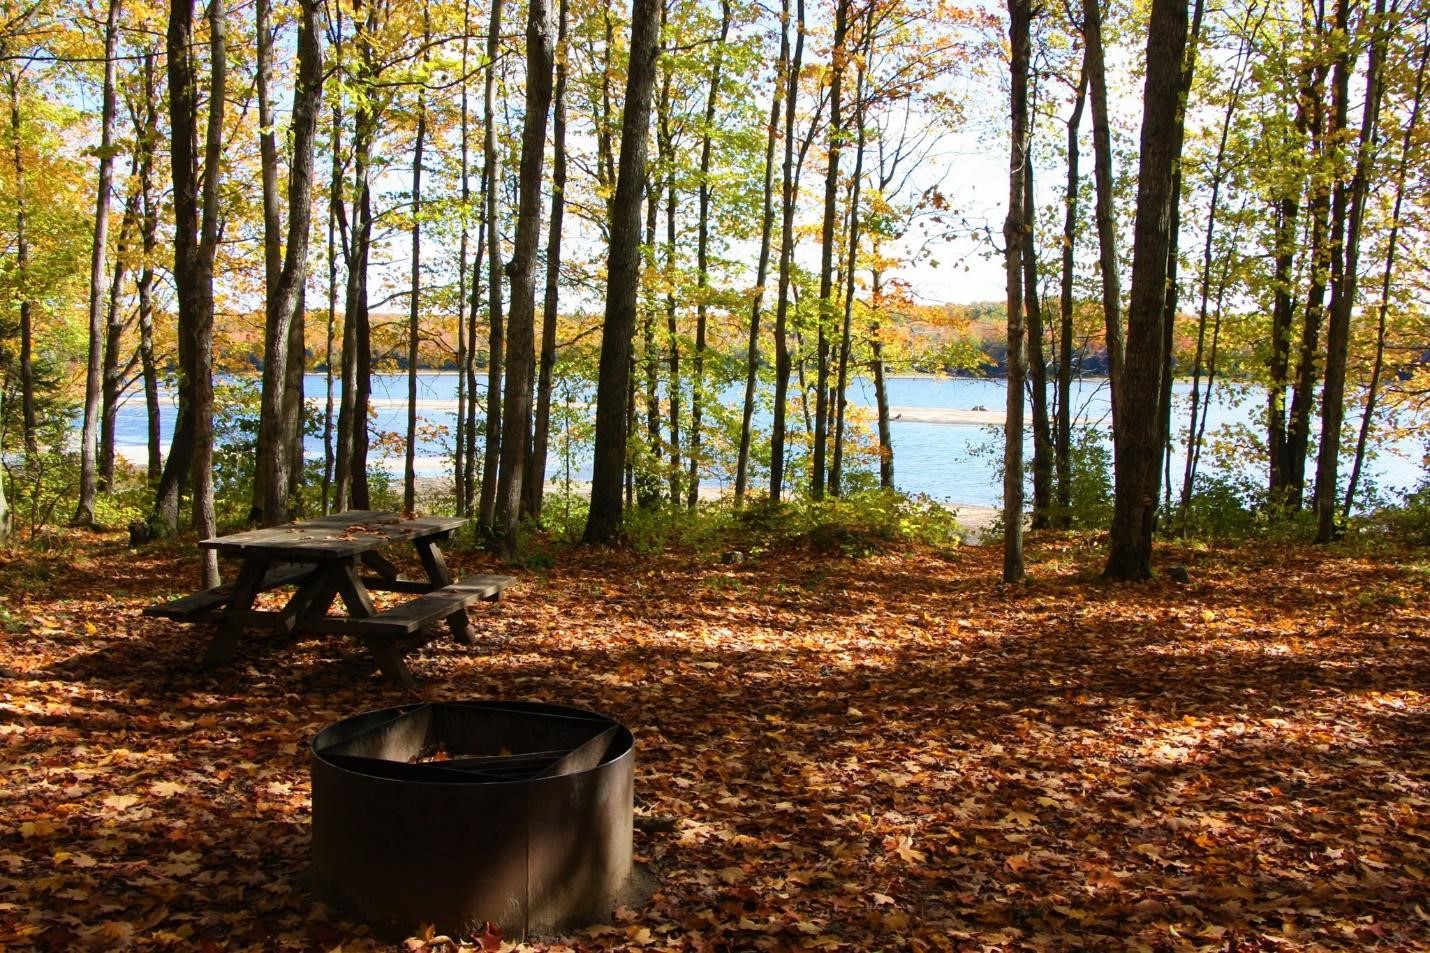 One of the campgrounds near Munising. PC: Instagrammer @maymiejameson